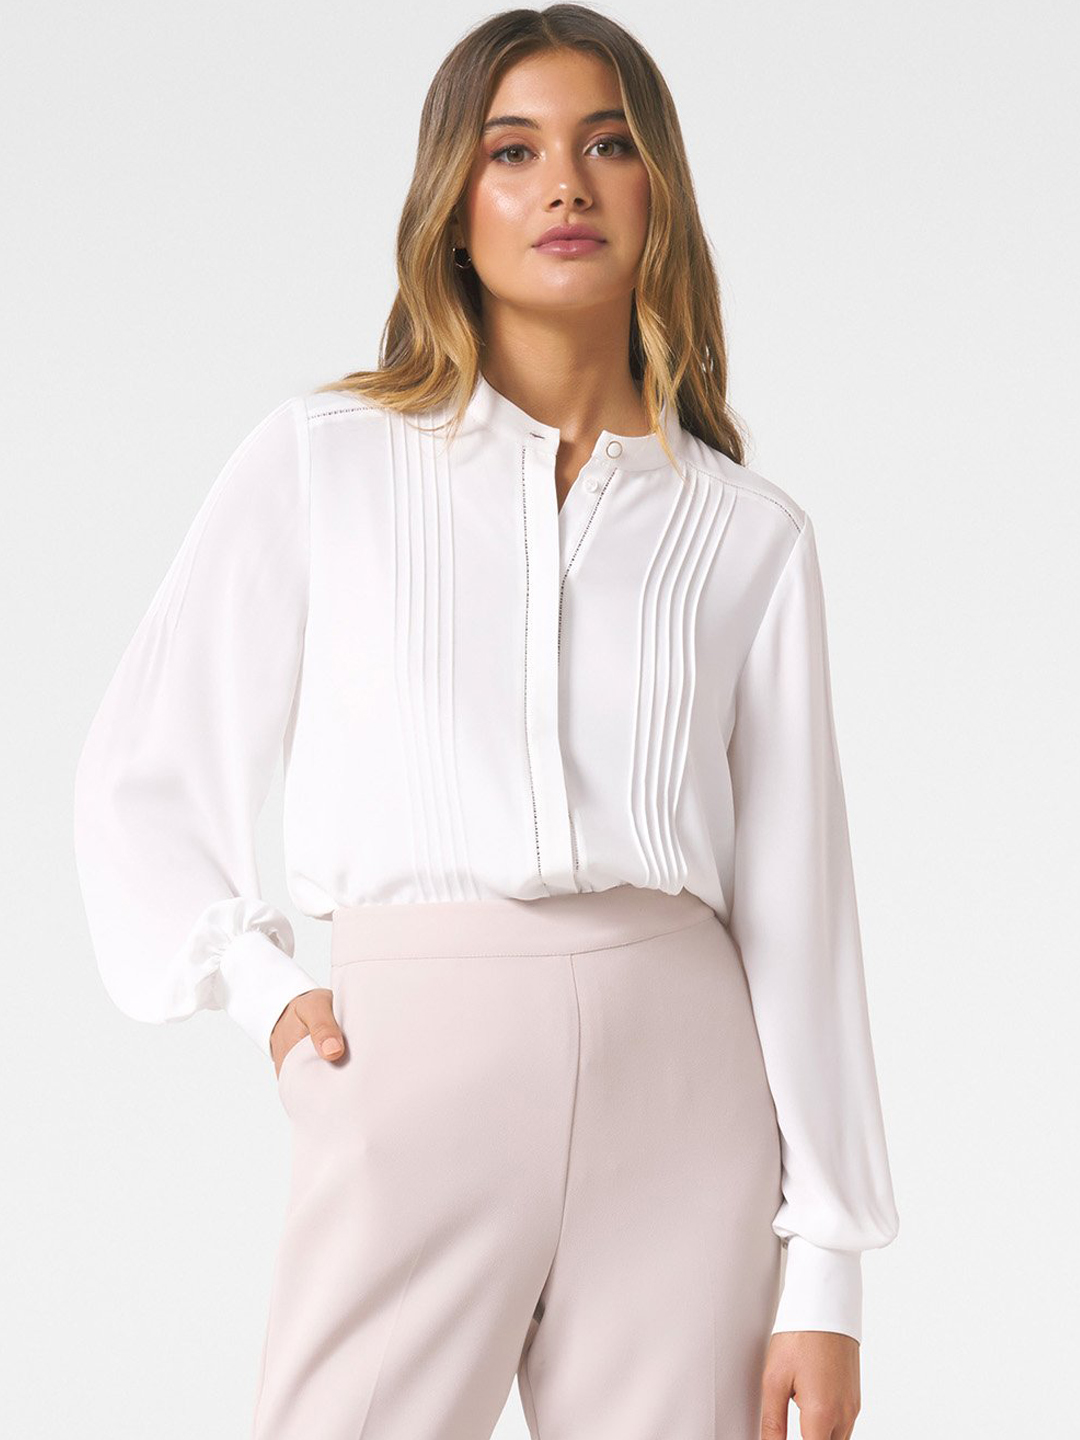 Forever New Women White Solid Trim Pin Tuck Shirt Price in India